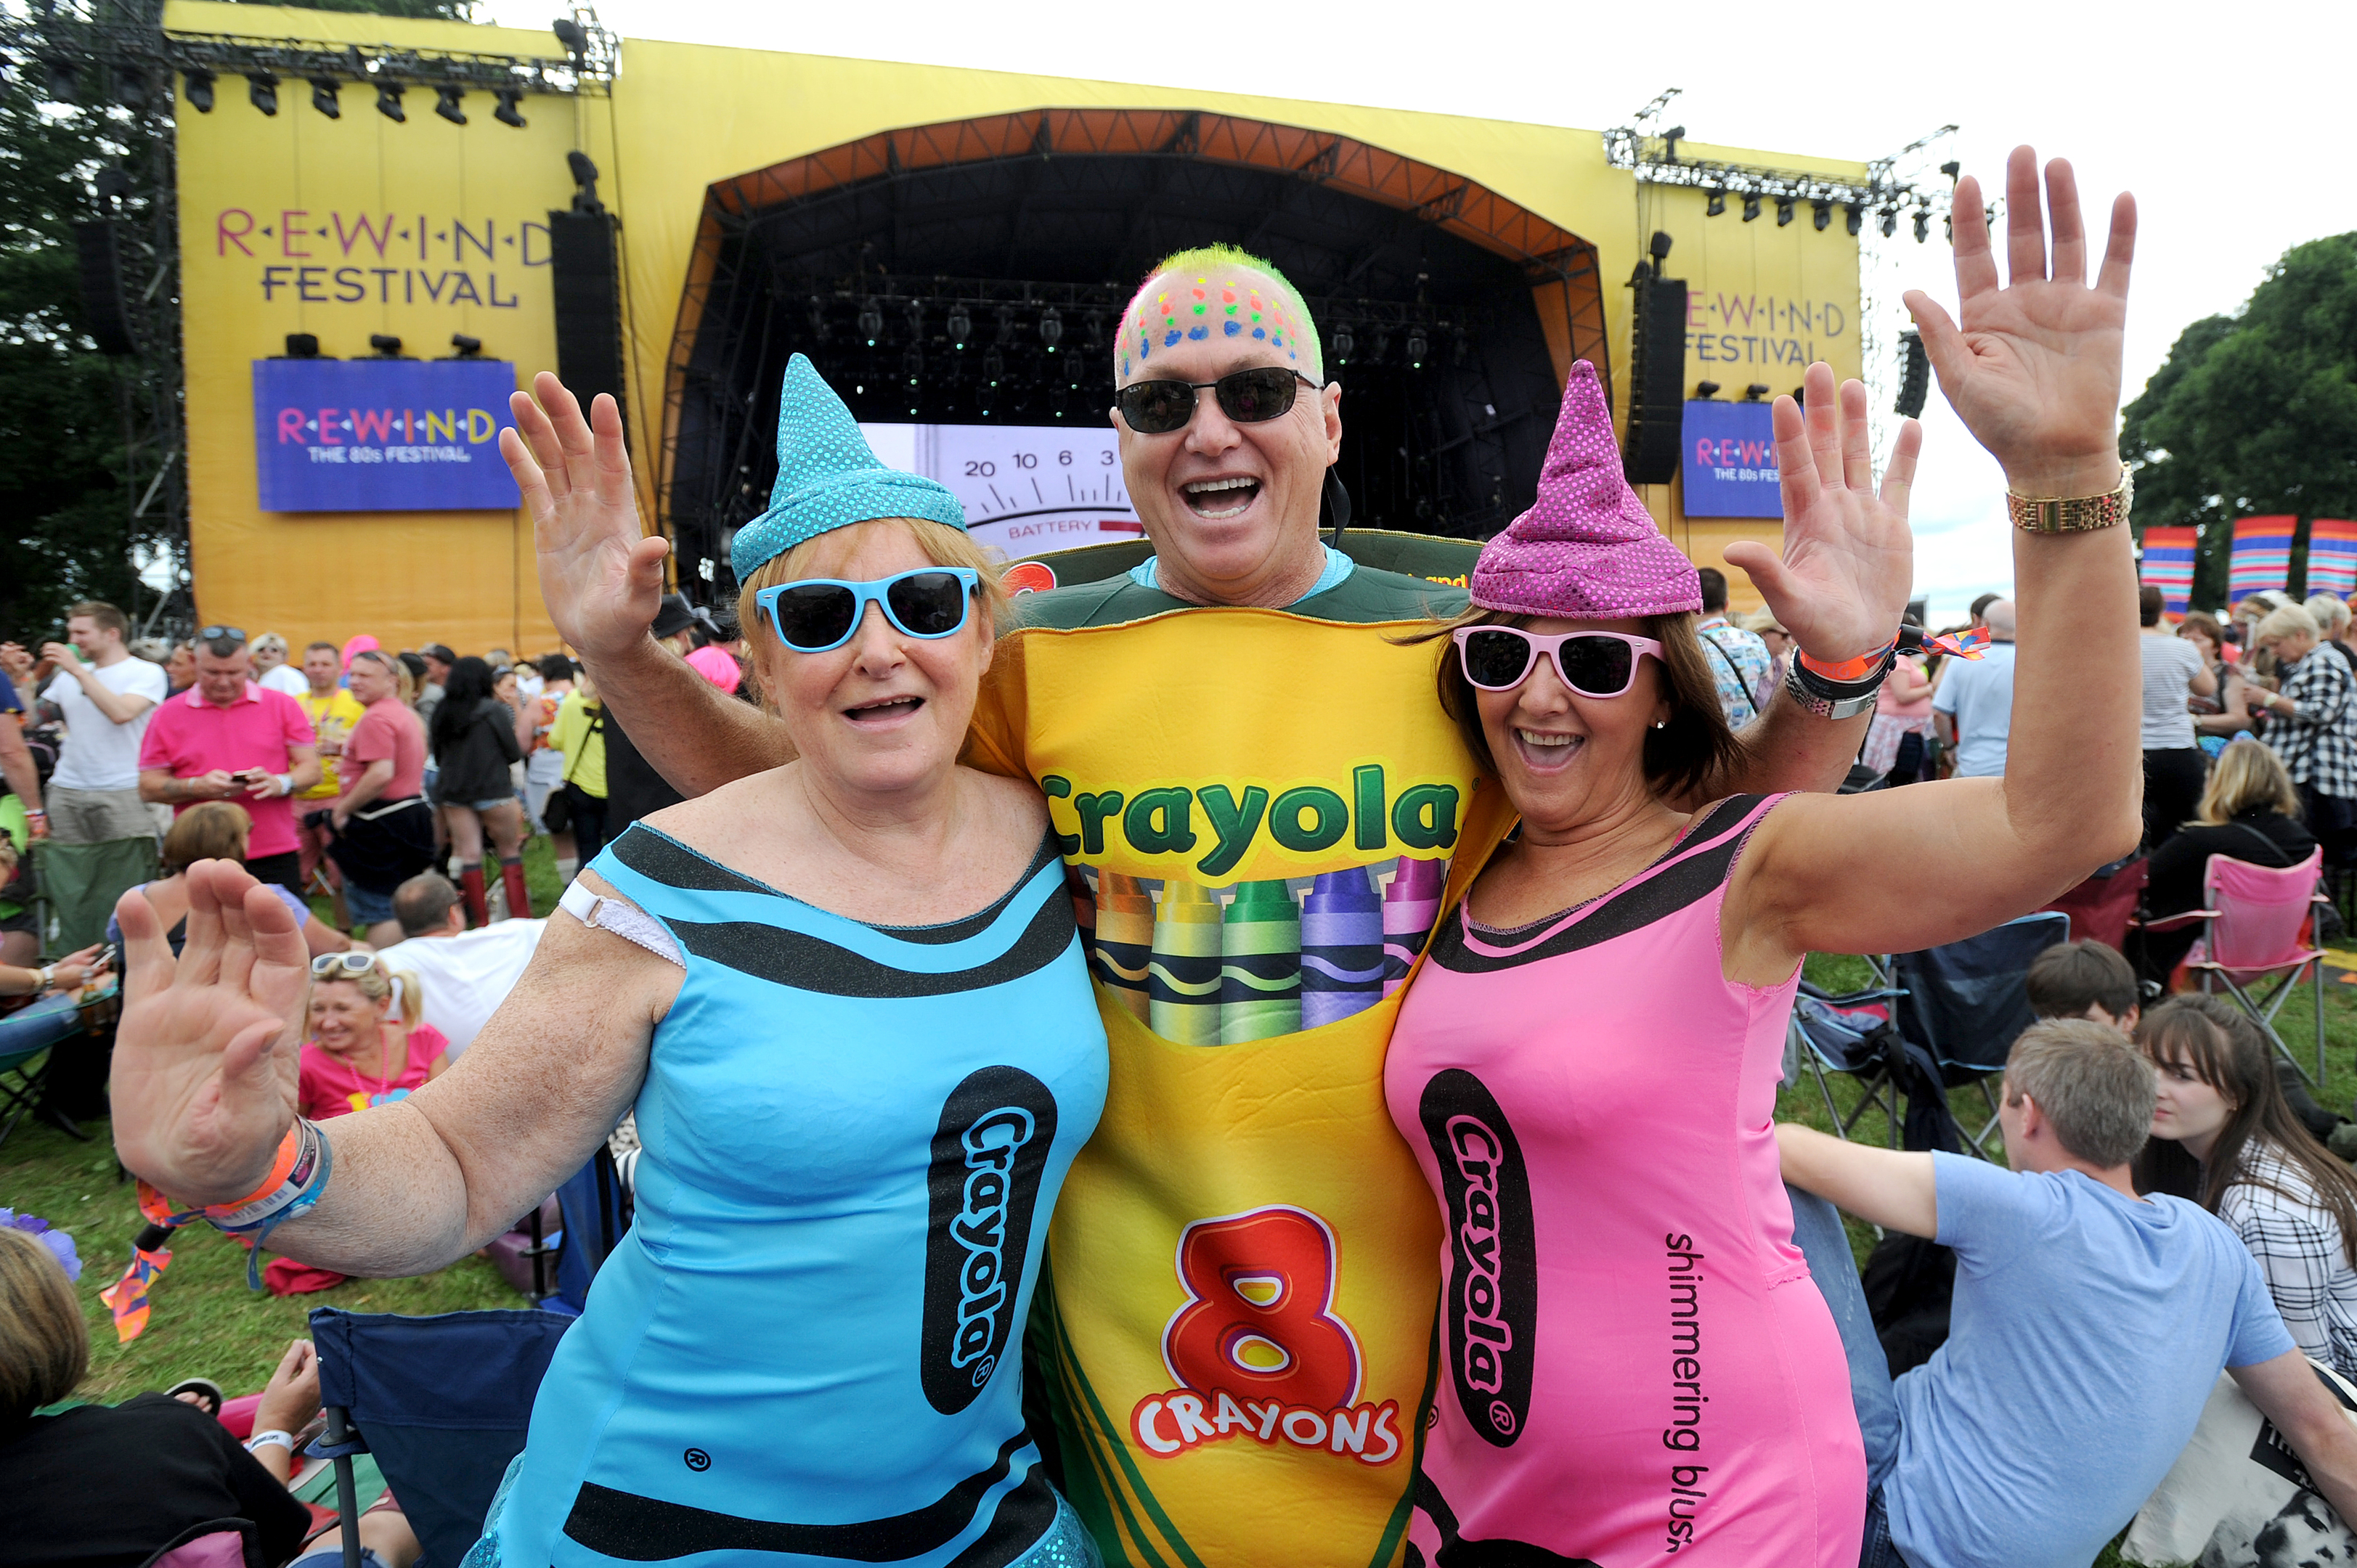 Begivenhed chokolade Bugt VIDEO: Rewind Festival fans take '80s costumes and dance routines  seriously! - The Sunday Post